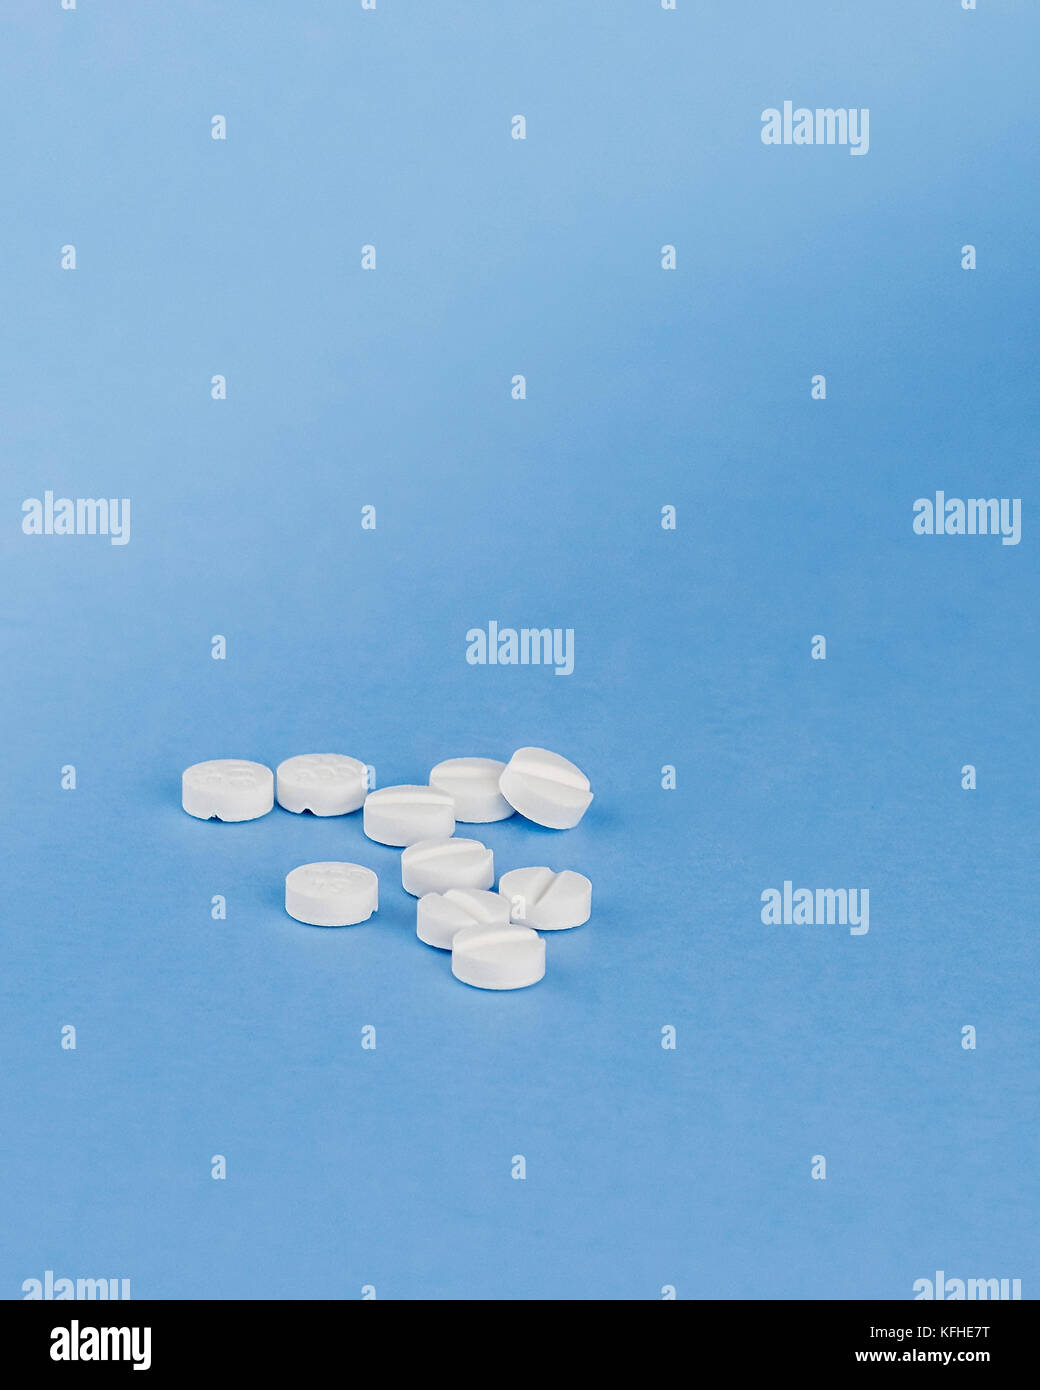 A group of 10 prescription prednisone pills used for treating allergies and inflammation on a blue background. USA Stock Photo